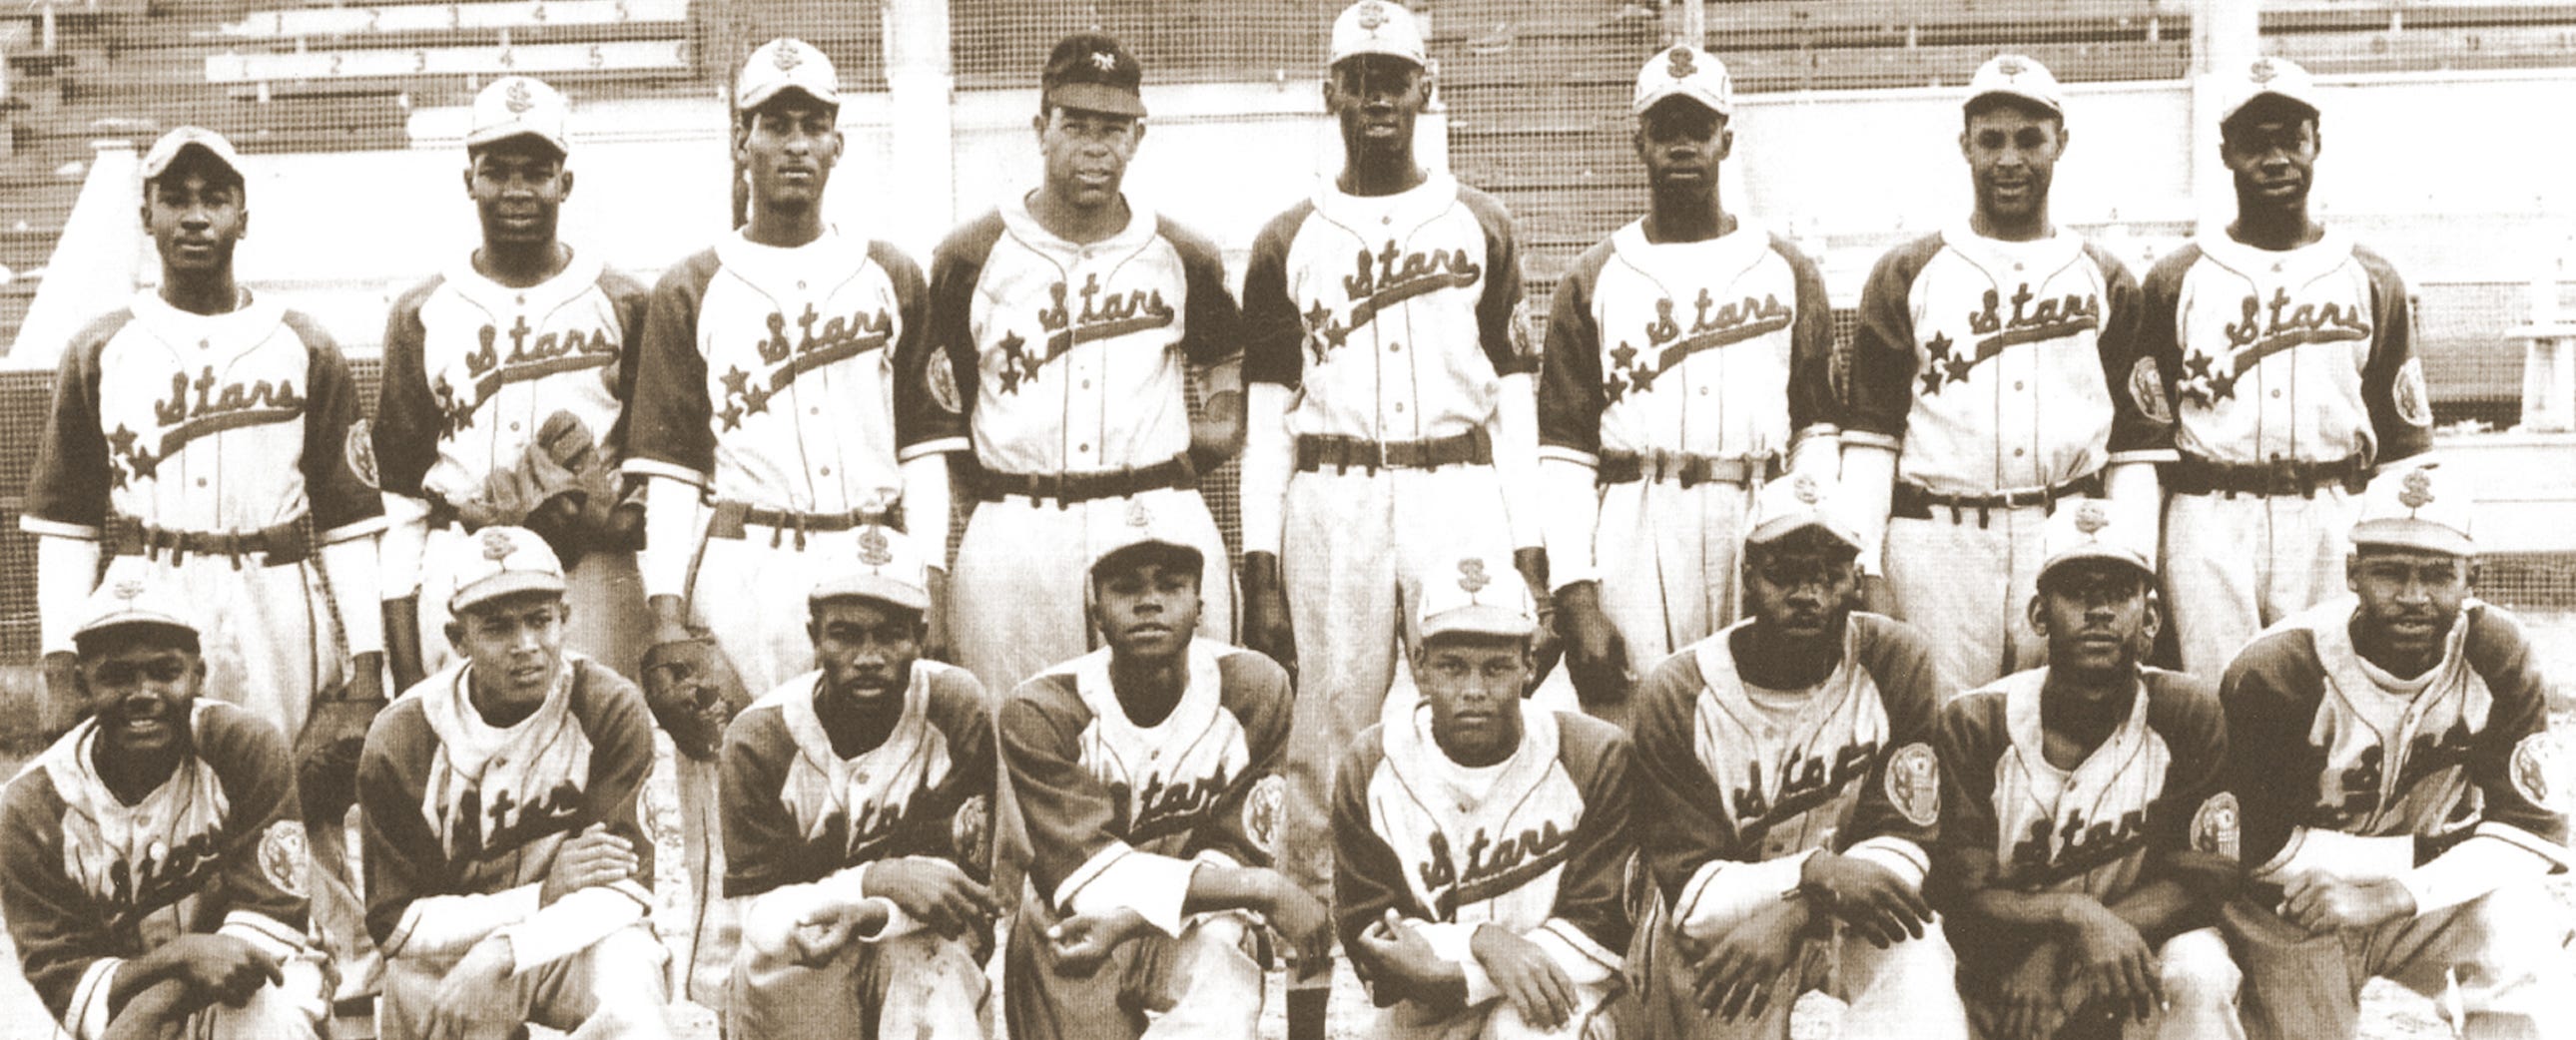 New documentary 'The League' is a celebration of the Negro Baseball Leagues